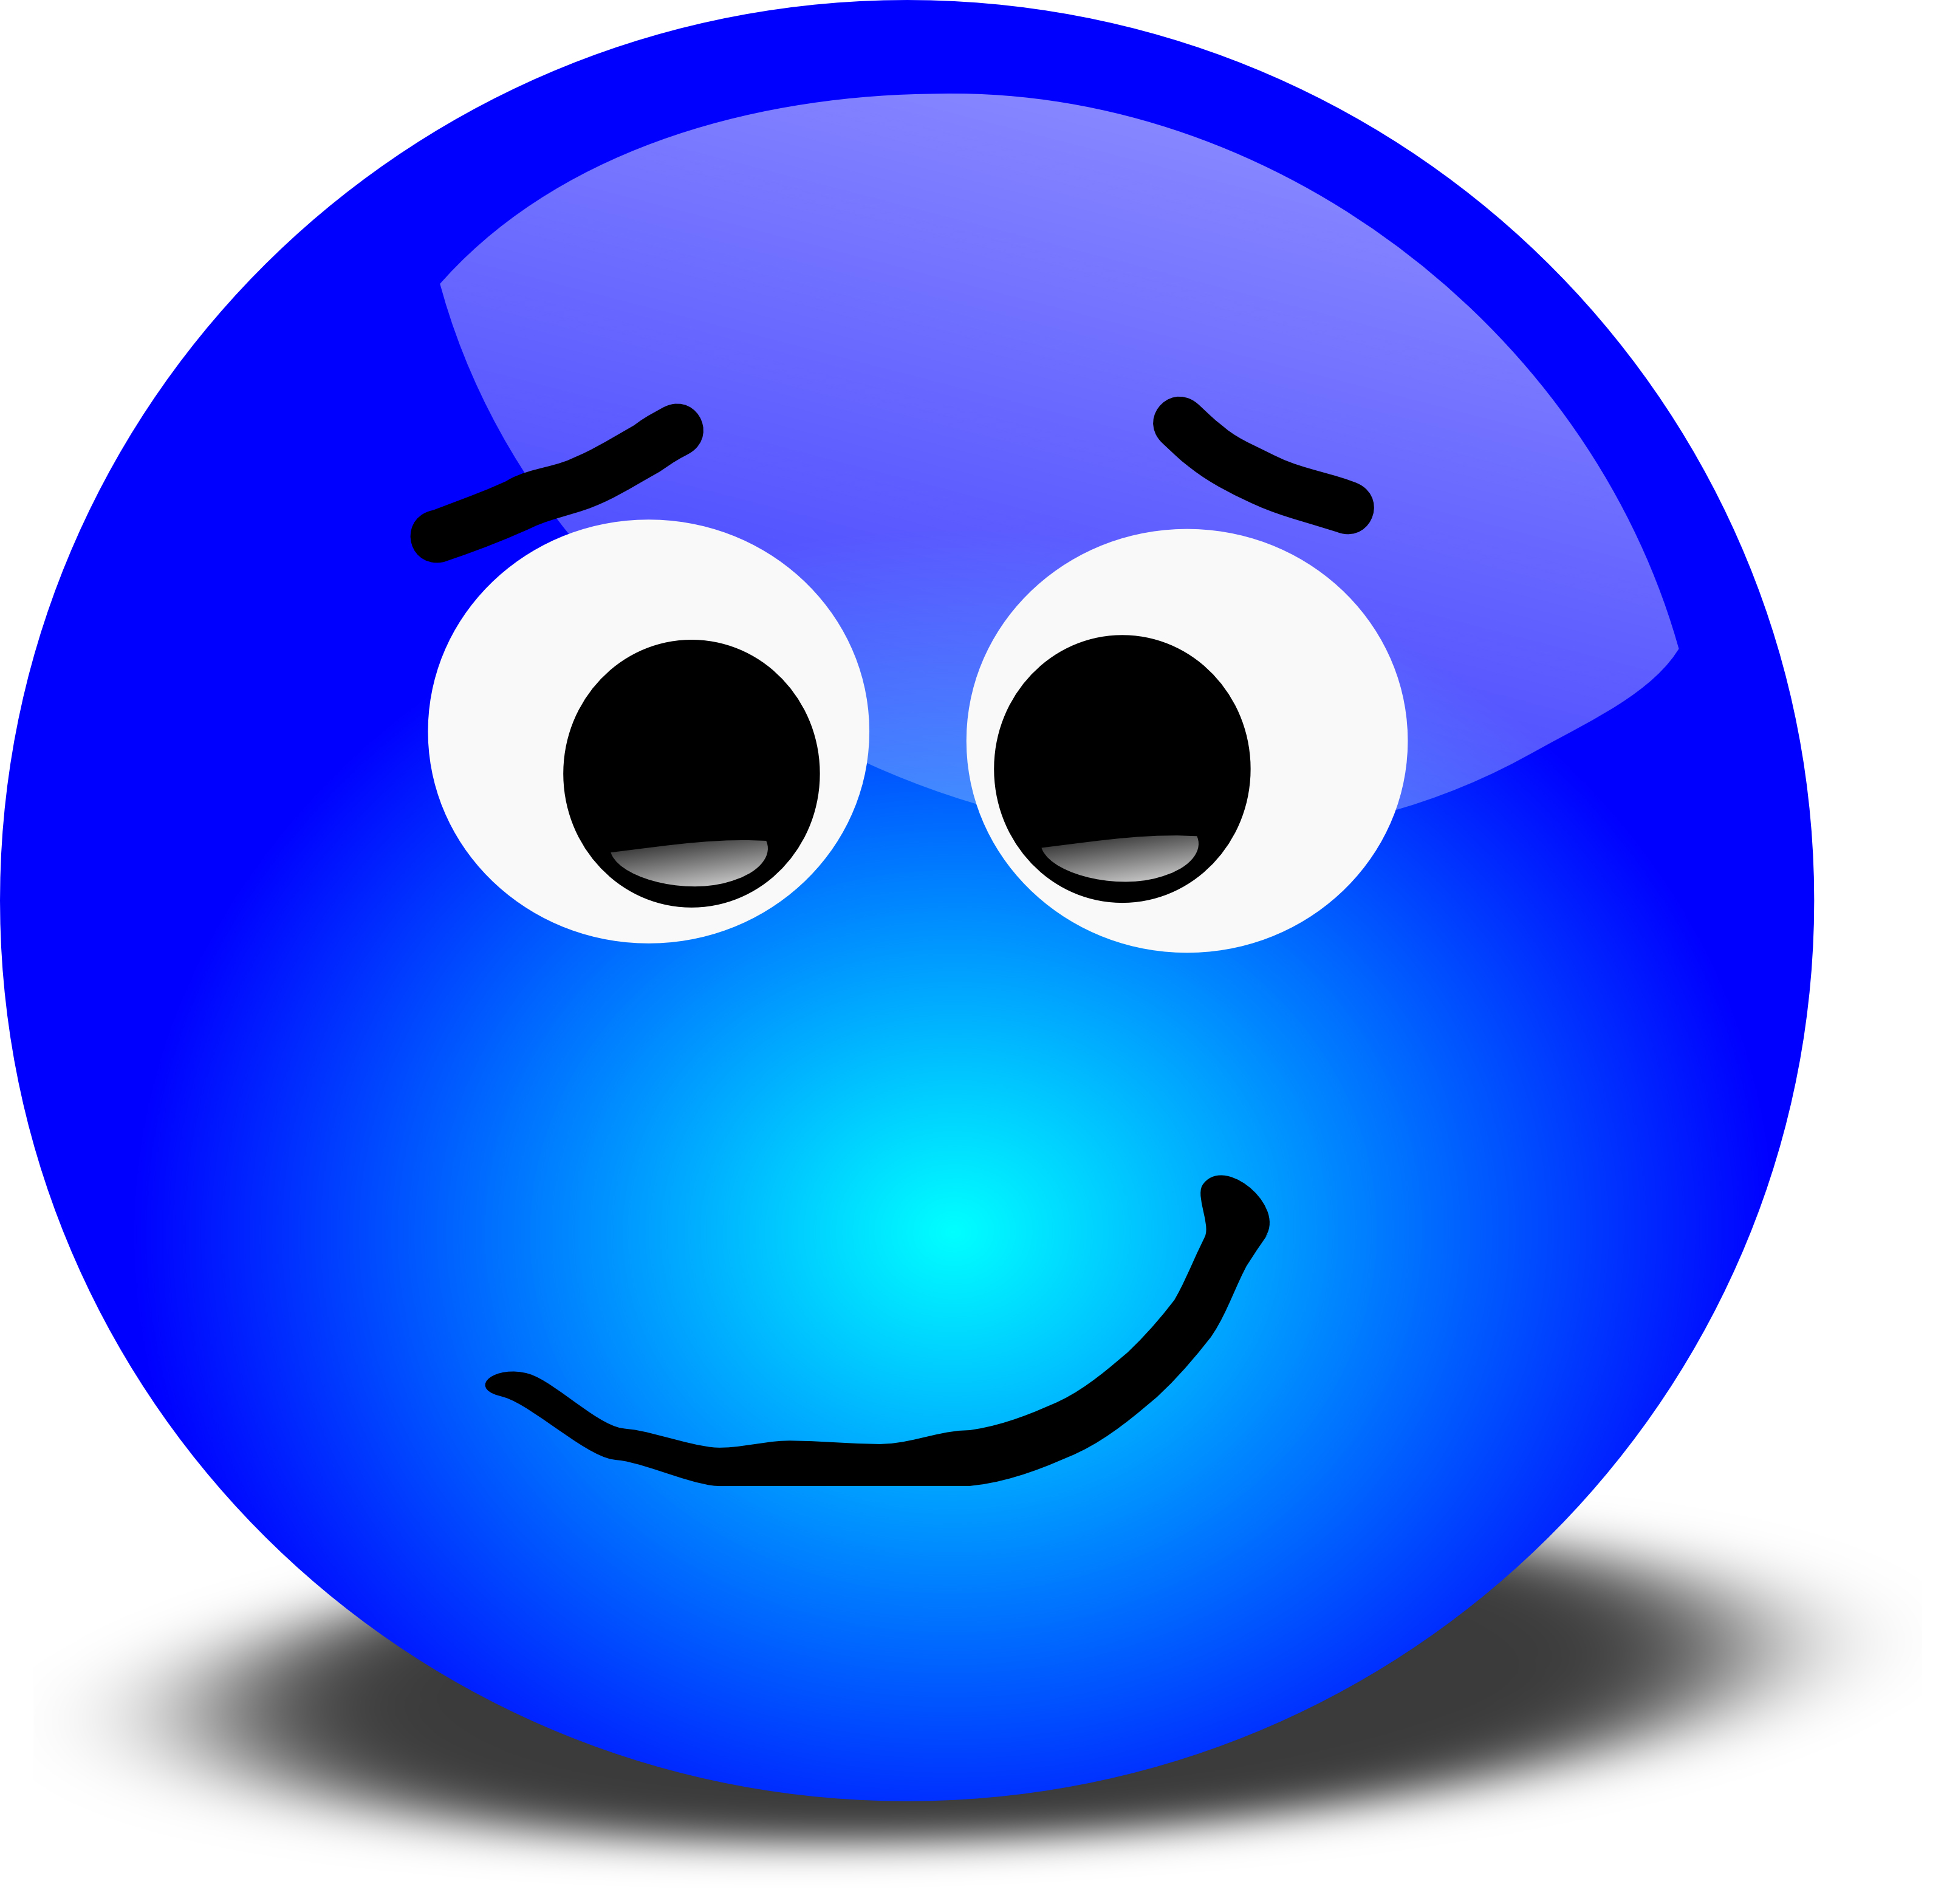 Smiley face expressions clipart